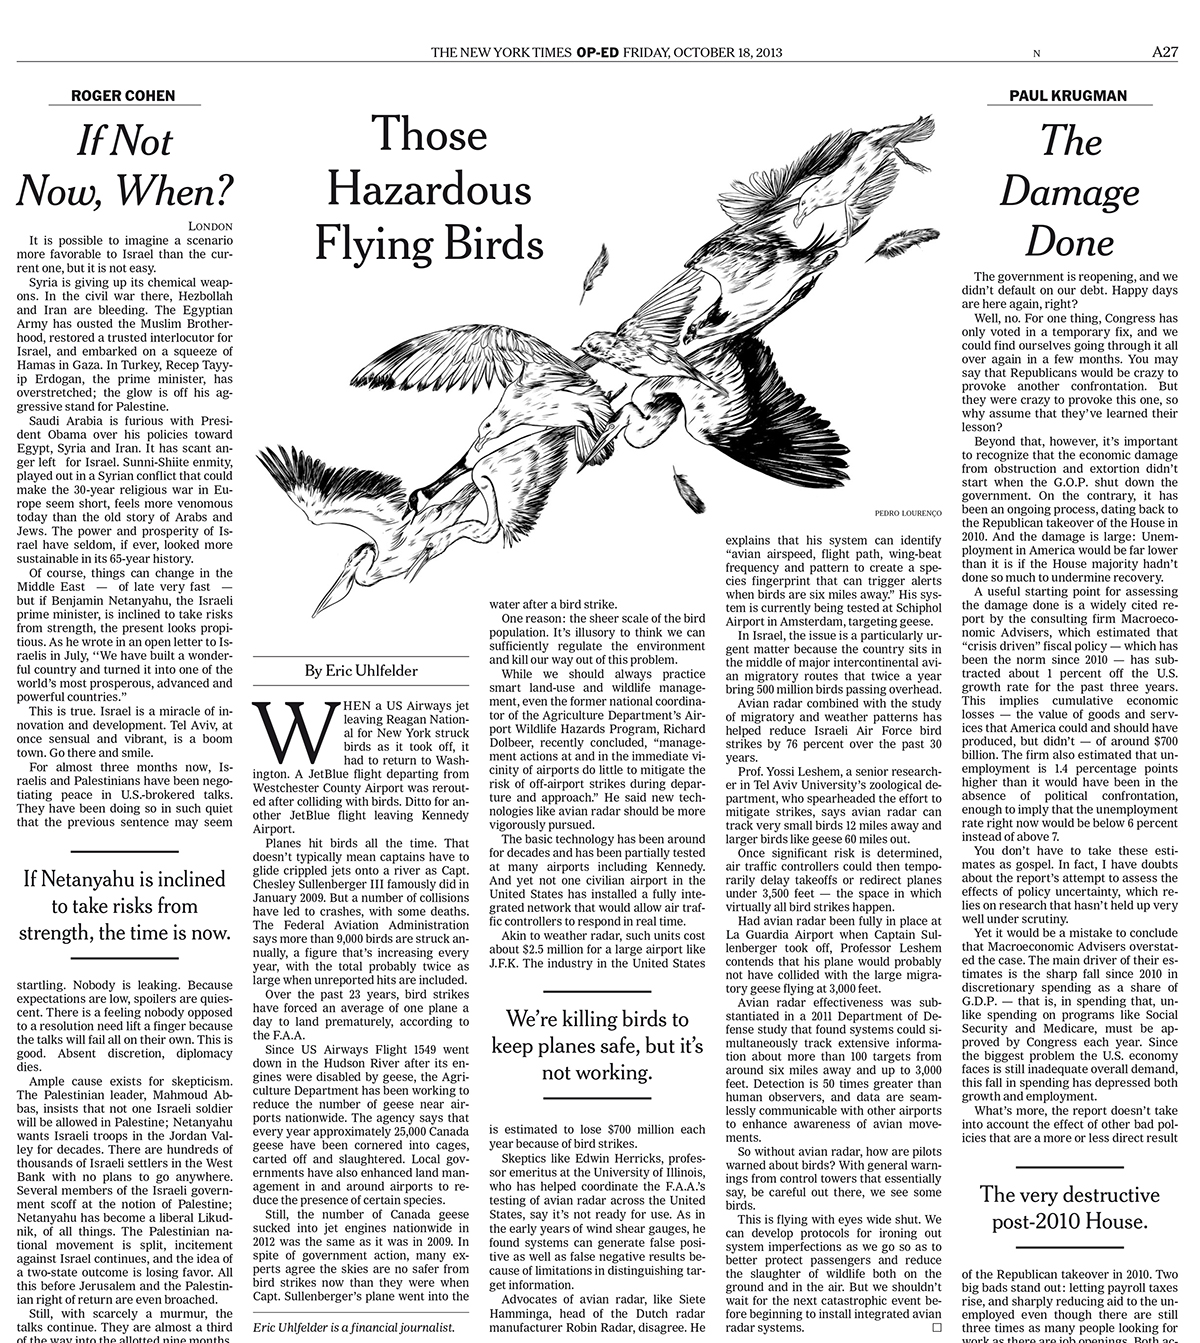 New York Times editorial